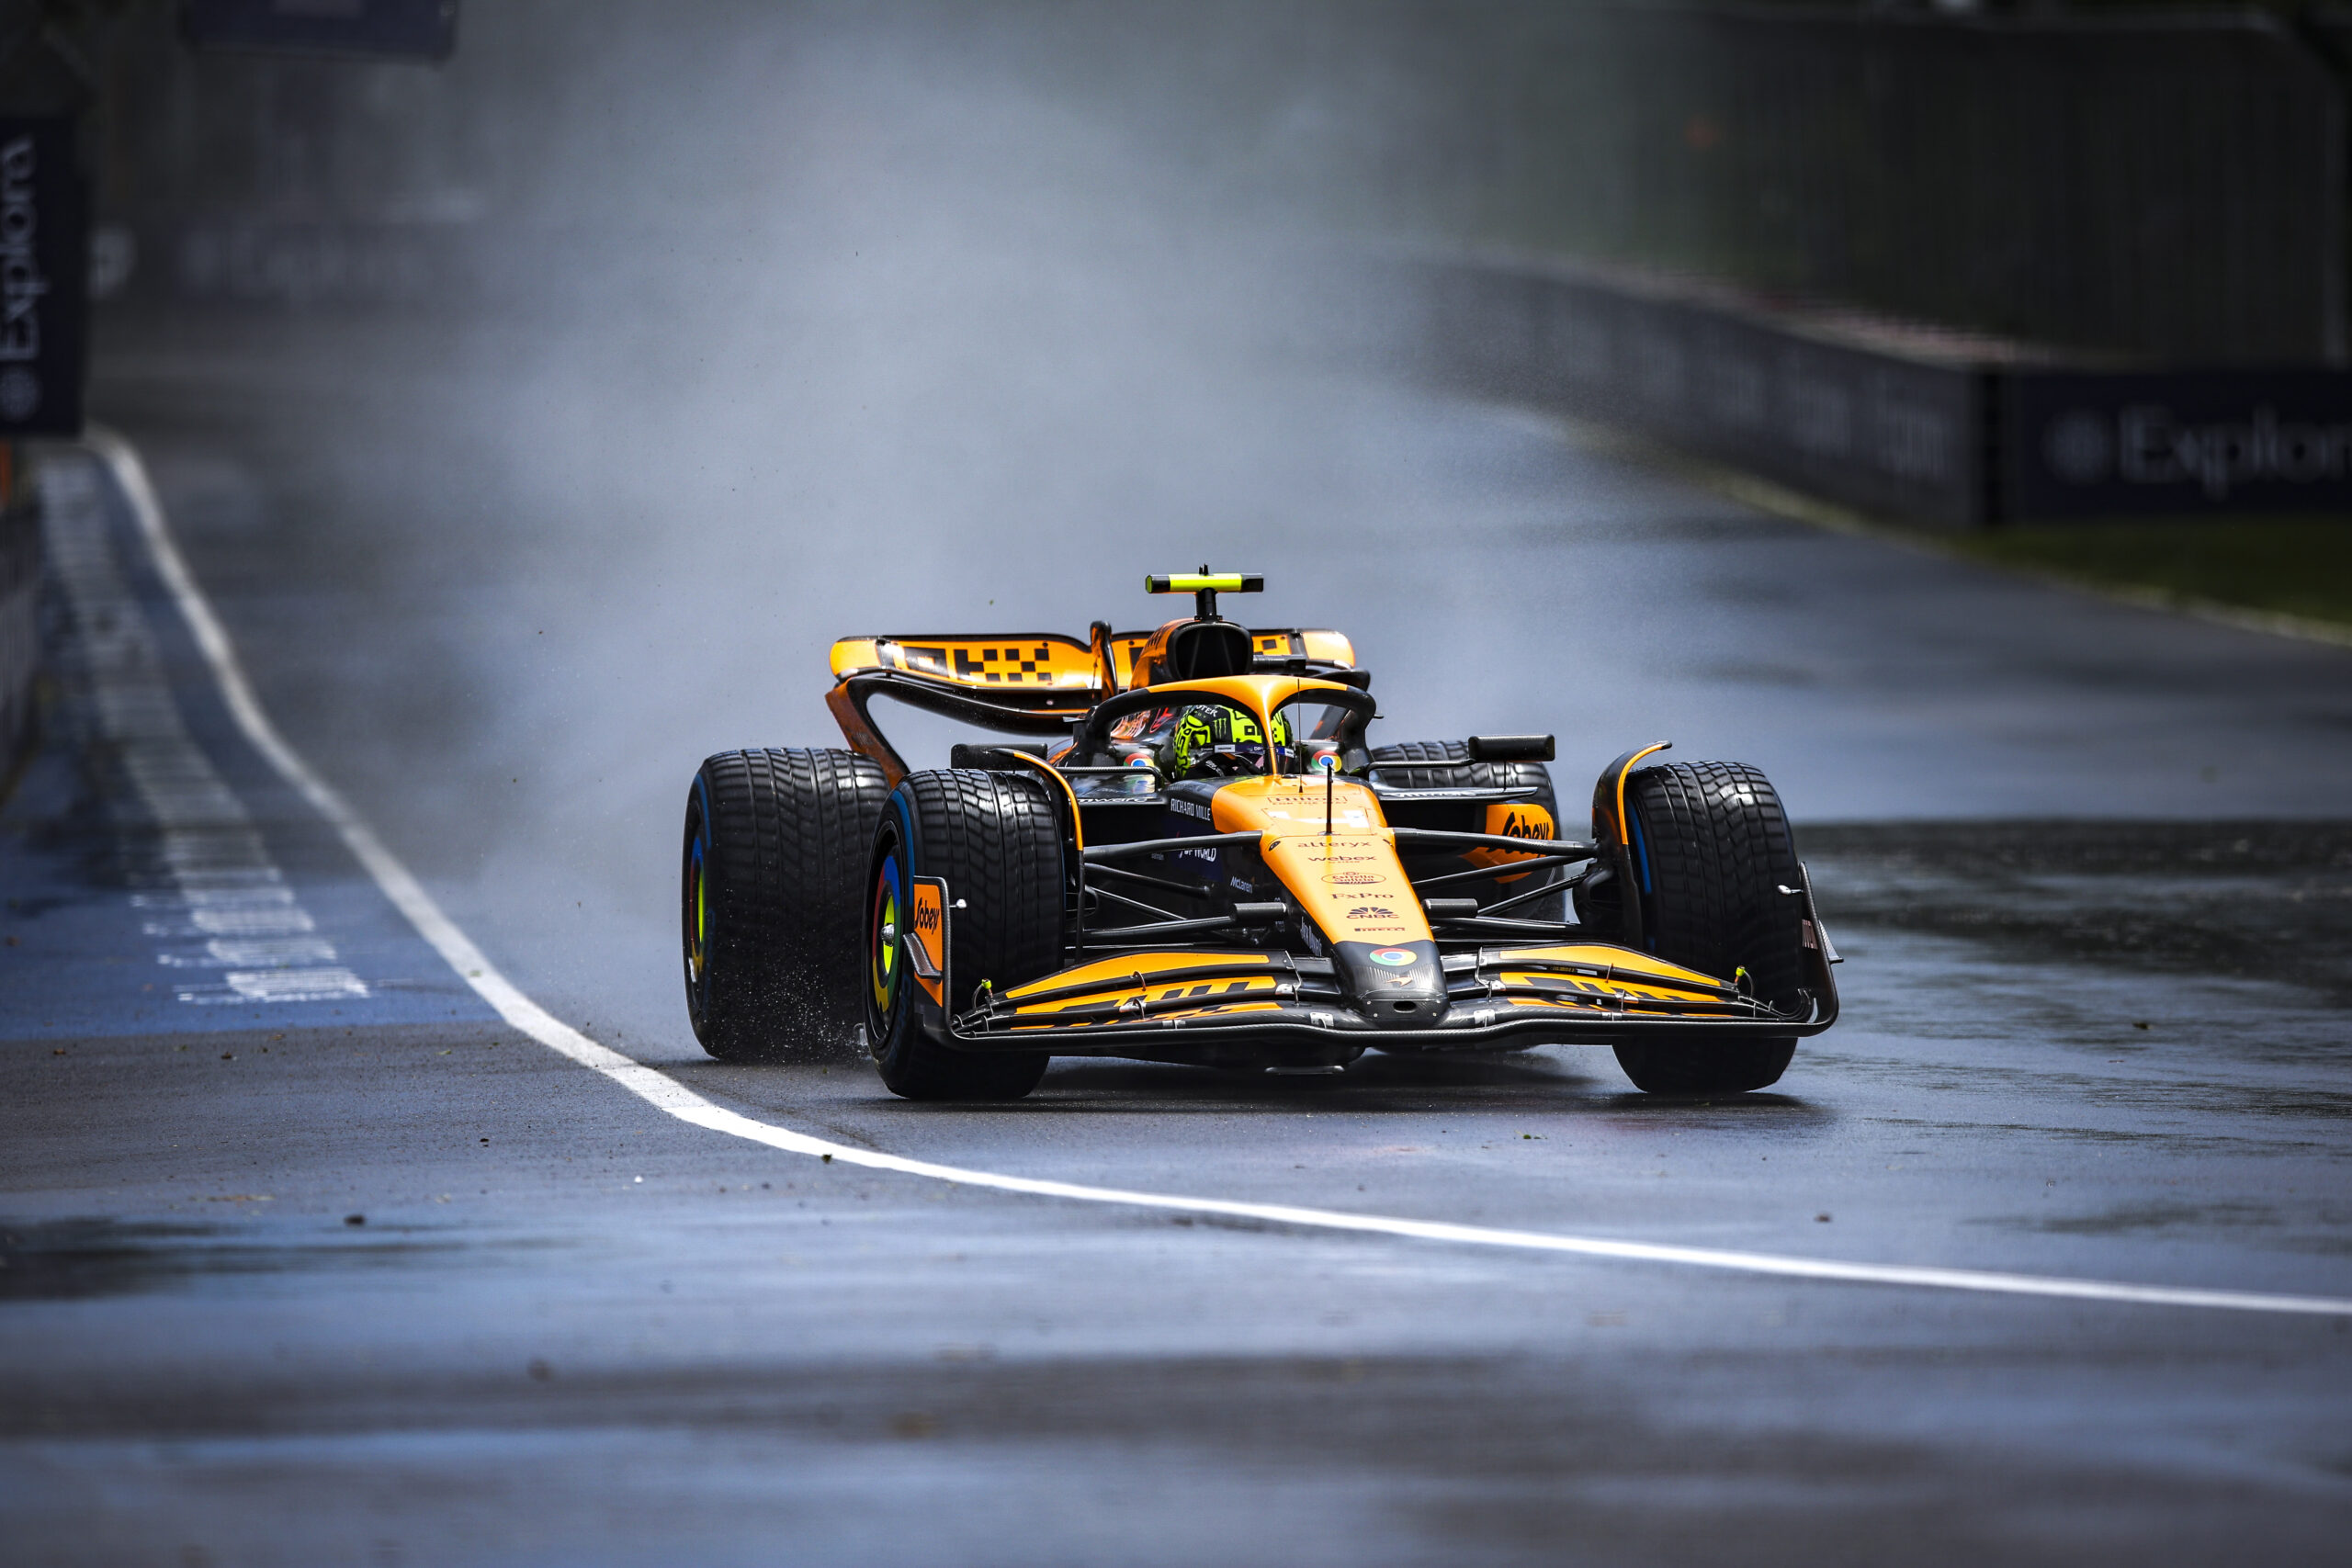 F1 – Norris heads rain-affected first practice session in Montréal 